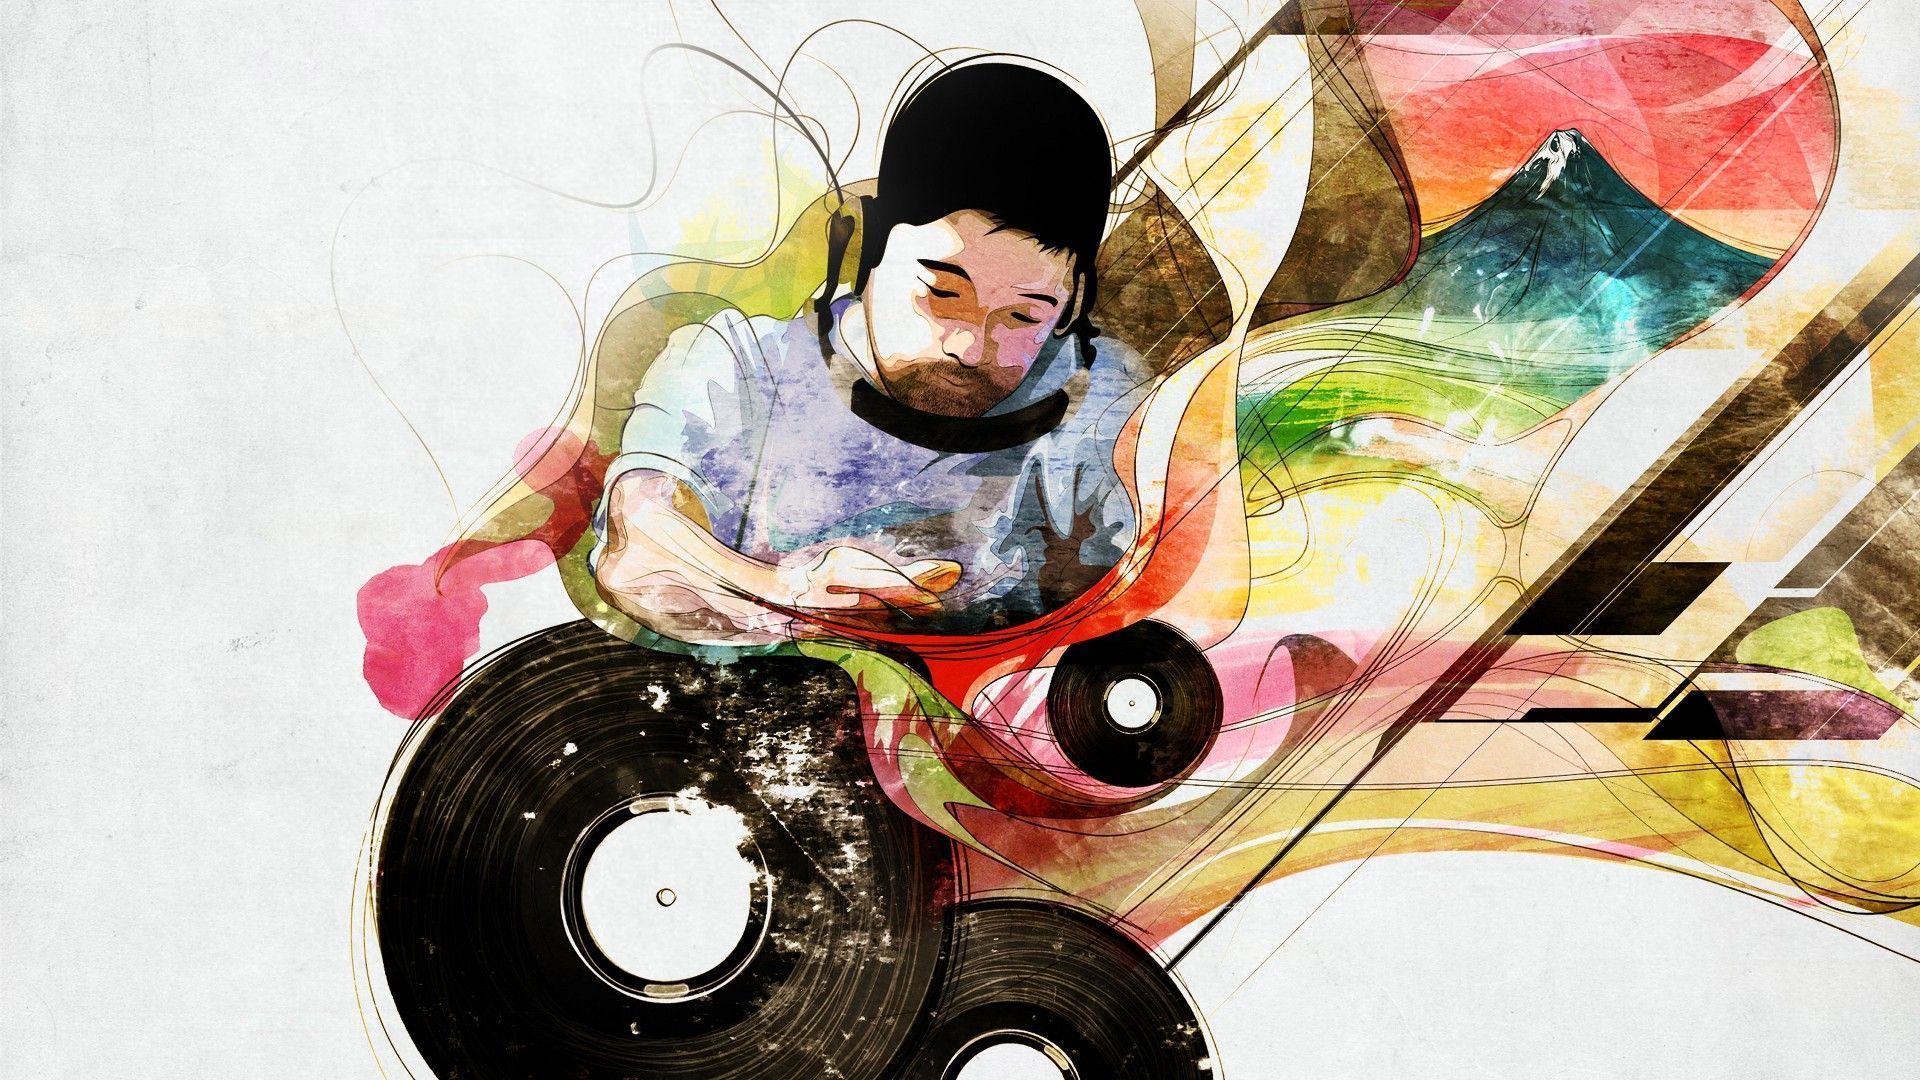 6 Nujabes HD Wallpapers | Backgrounds - Wallpaper Abyss